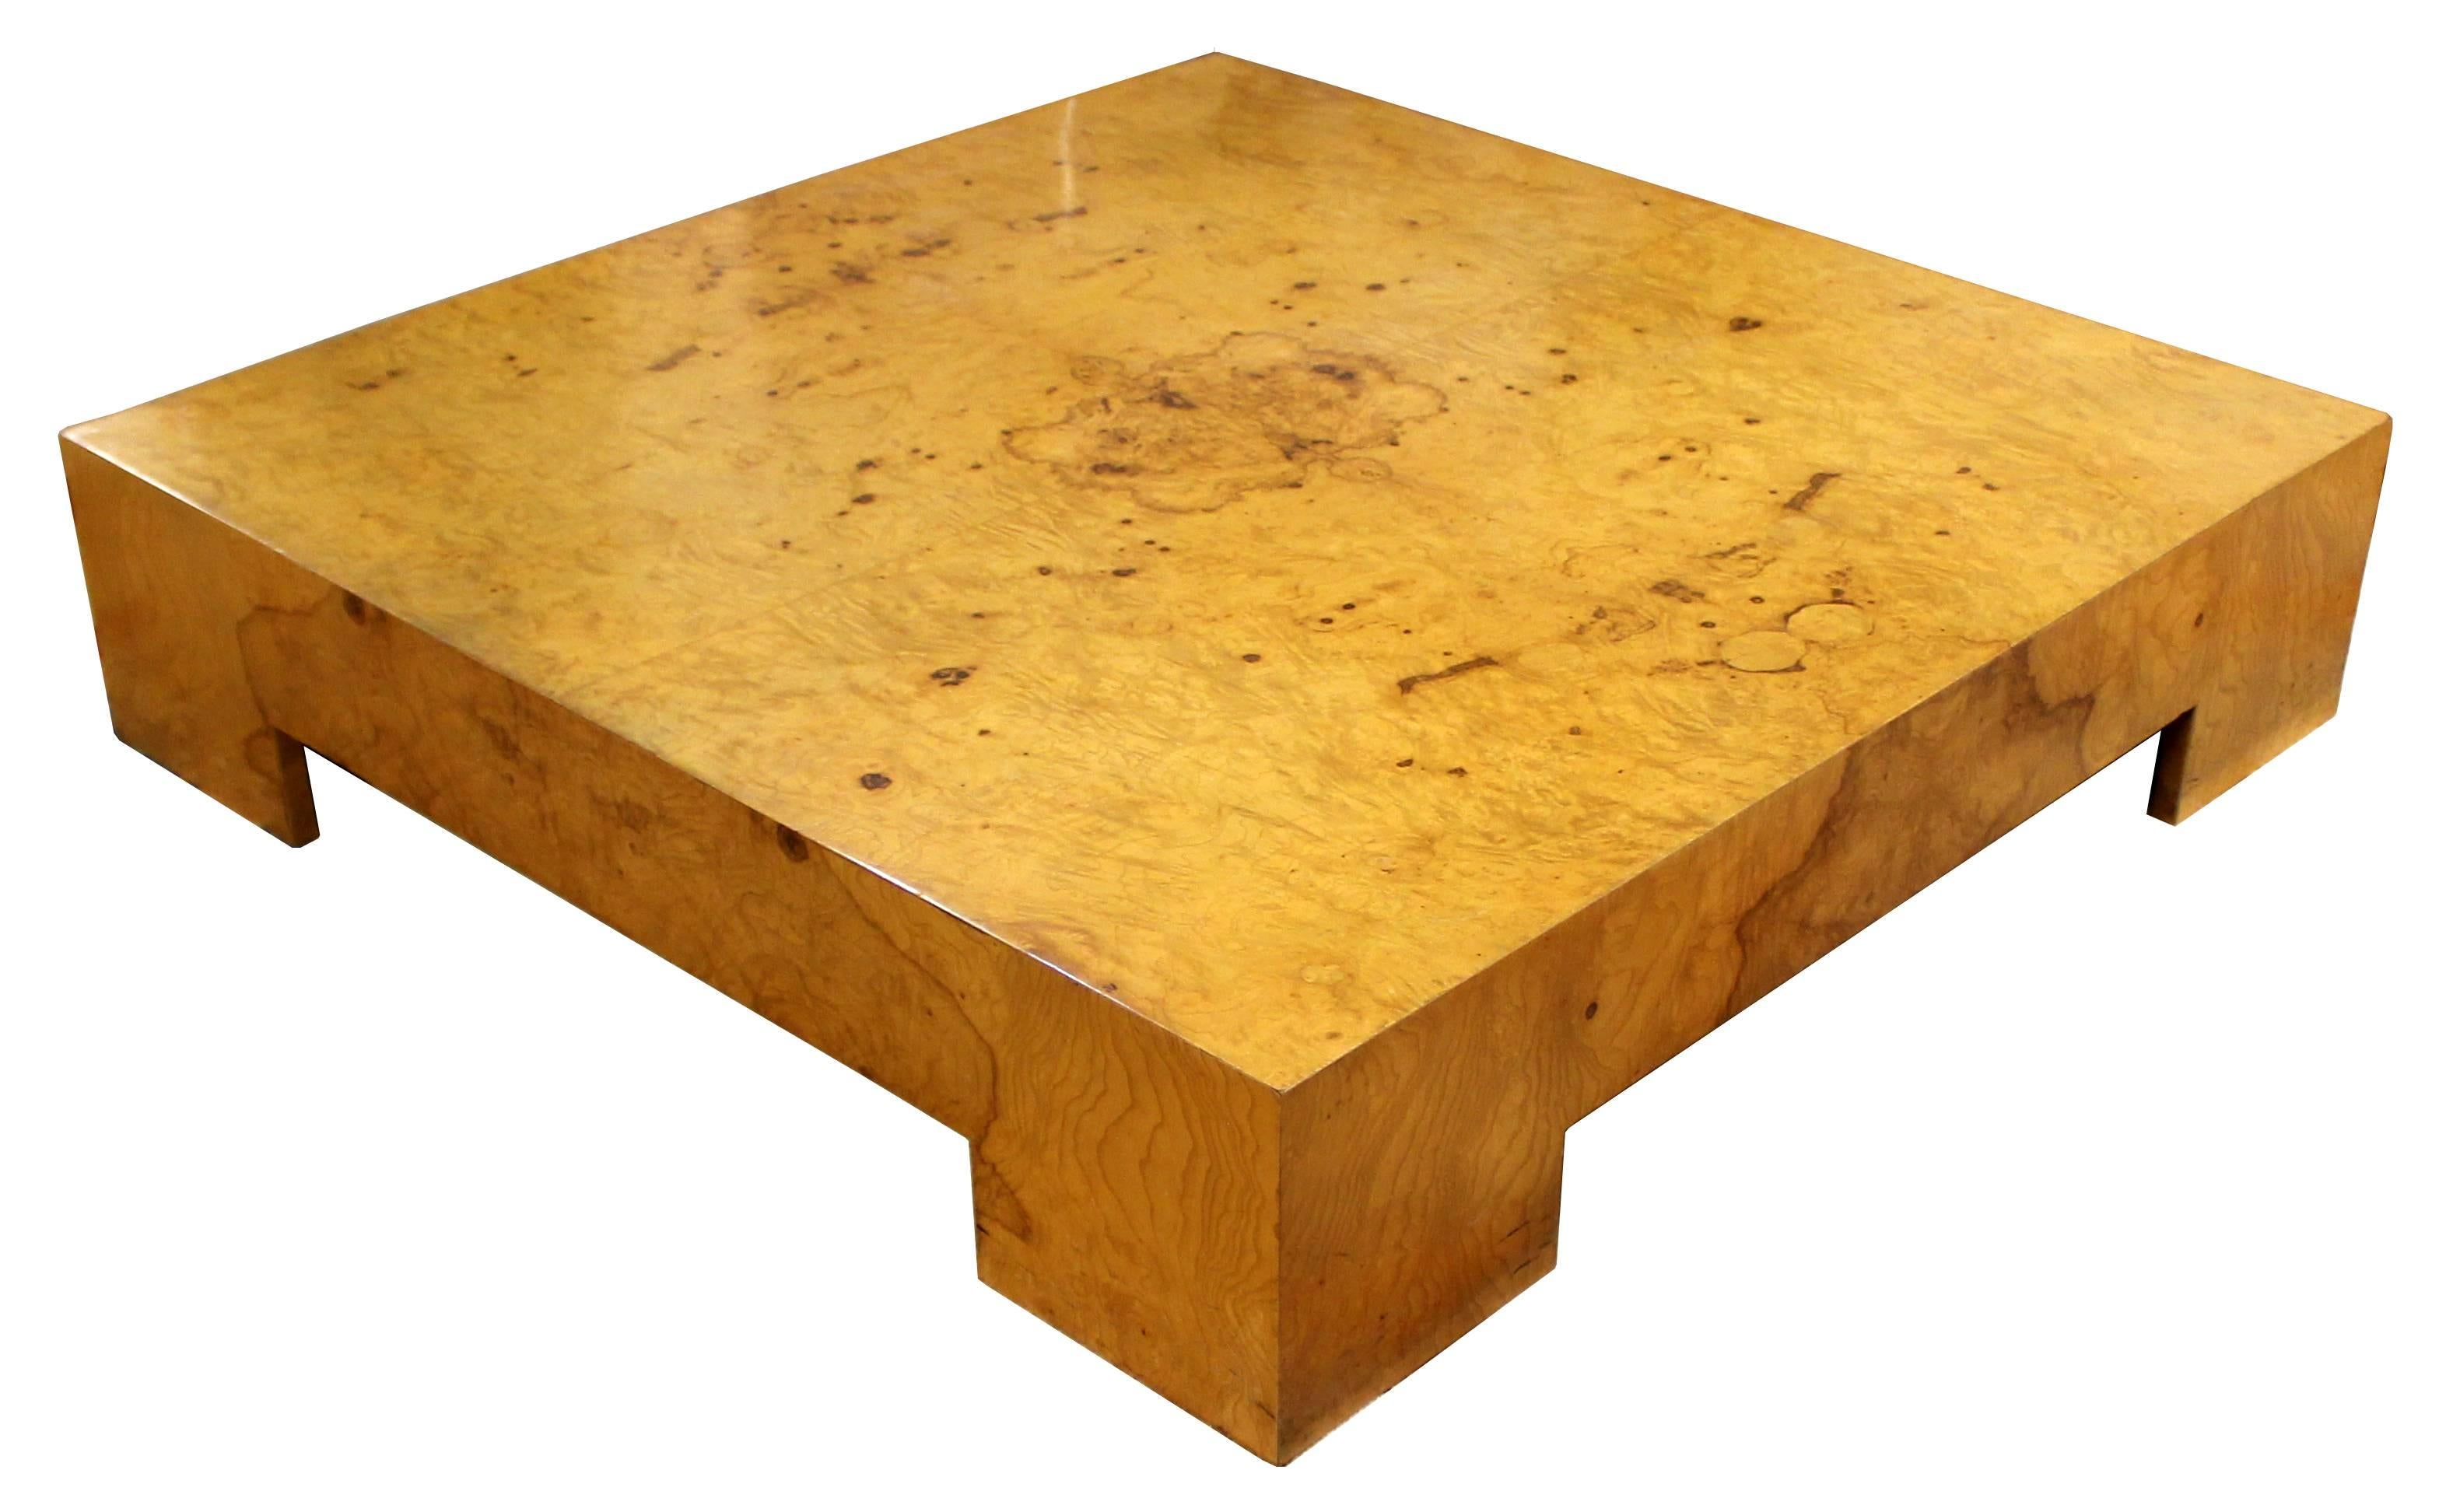 For your consideration is a fantastic, low, square, burl wood coffee table by Milo Baughman, circa the 1970s. In excellent condition. The dimensions are 48